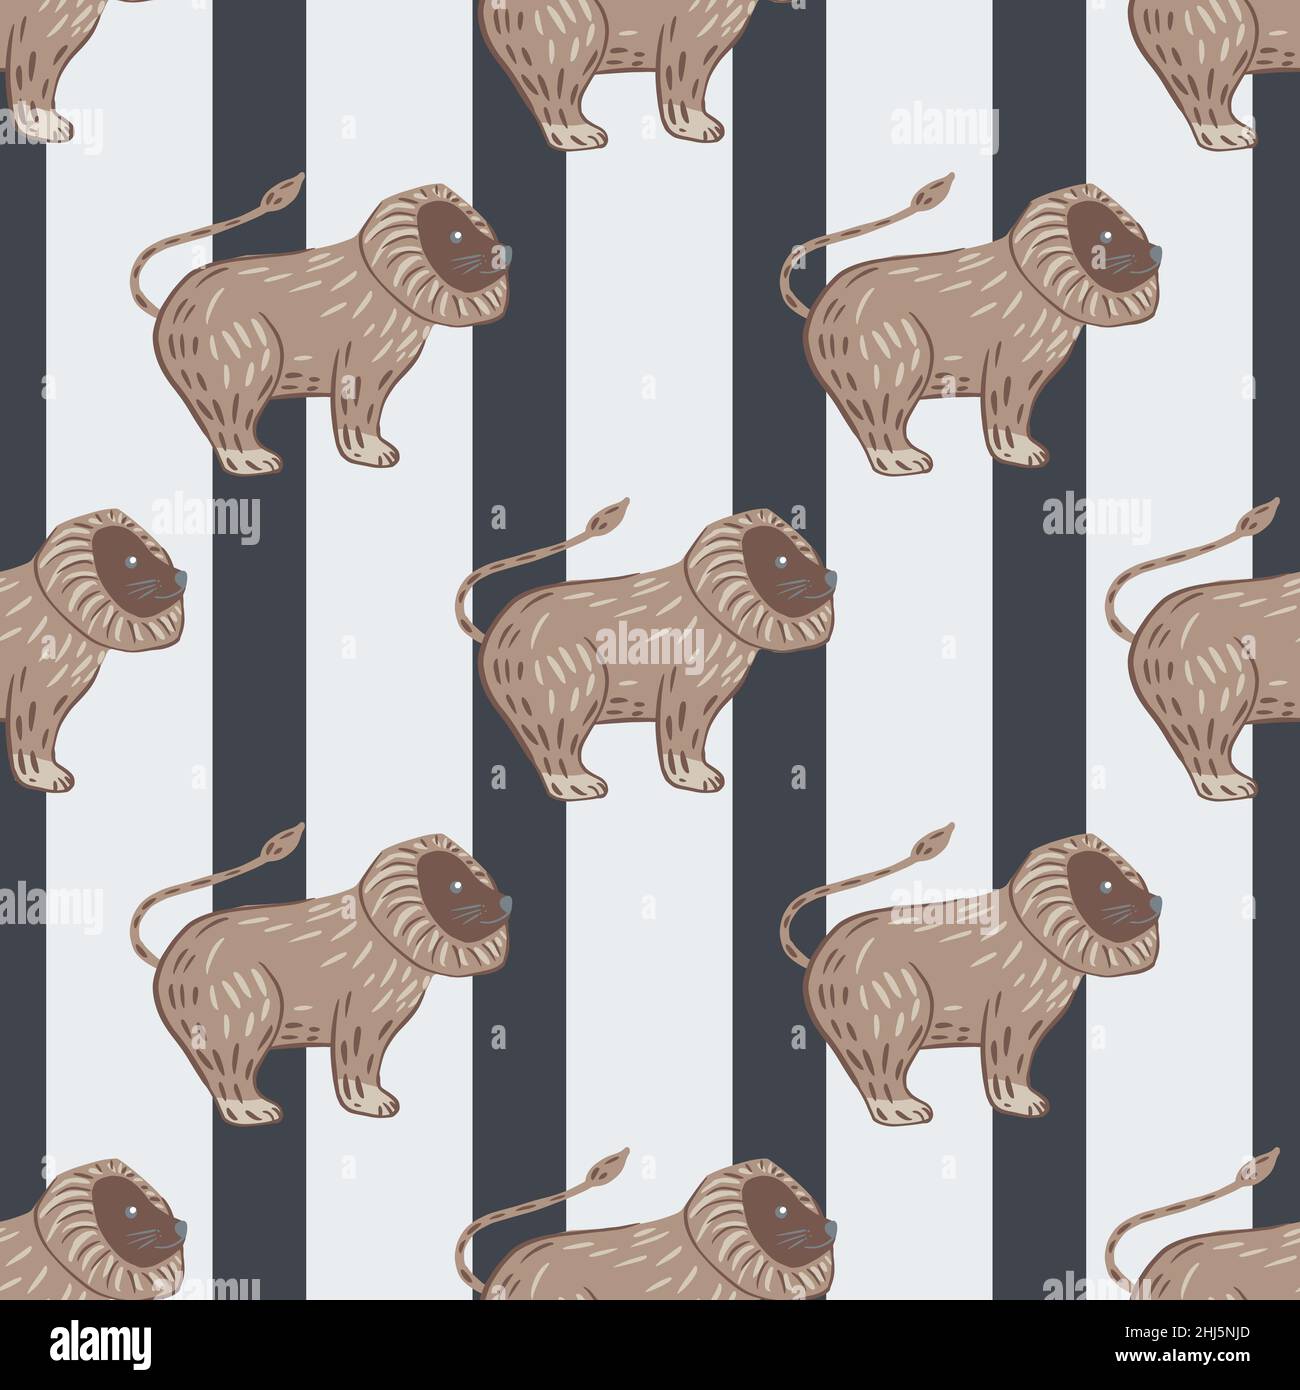 Childish animal seamless pattern with beige lion king shapes. Striped background with grey lines. Graphic design for wrapping paper and fabric texture Stock Vector